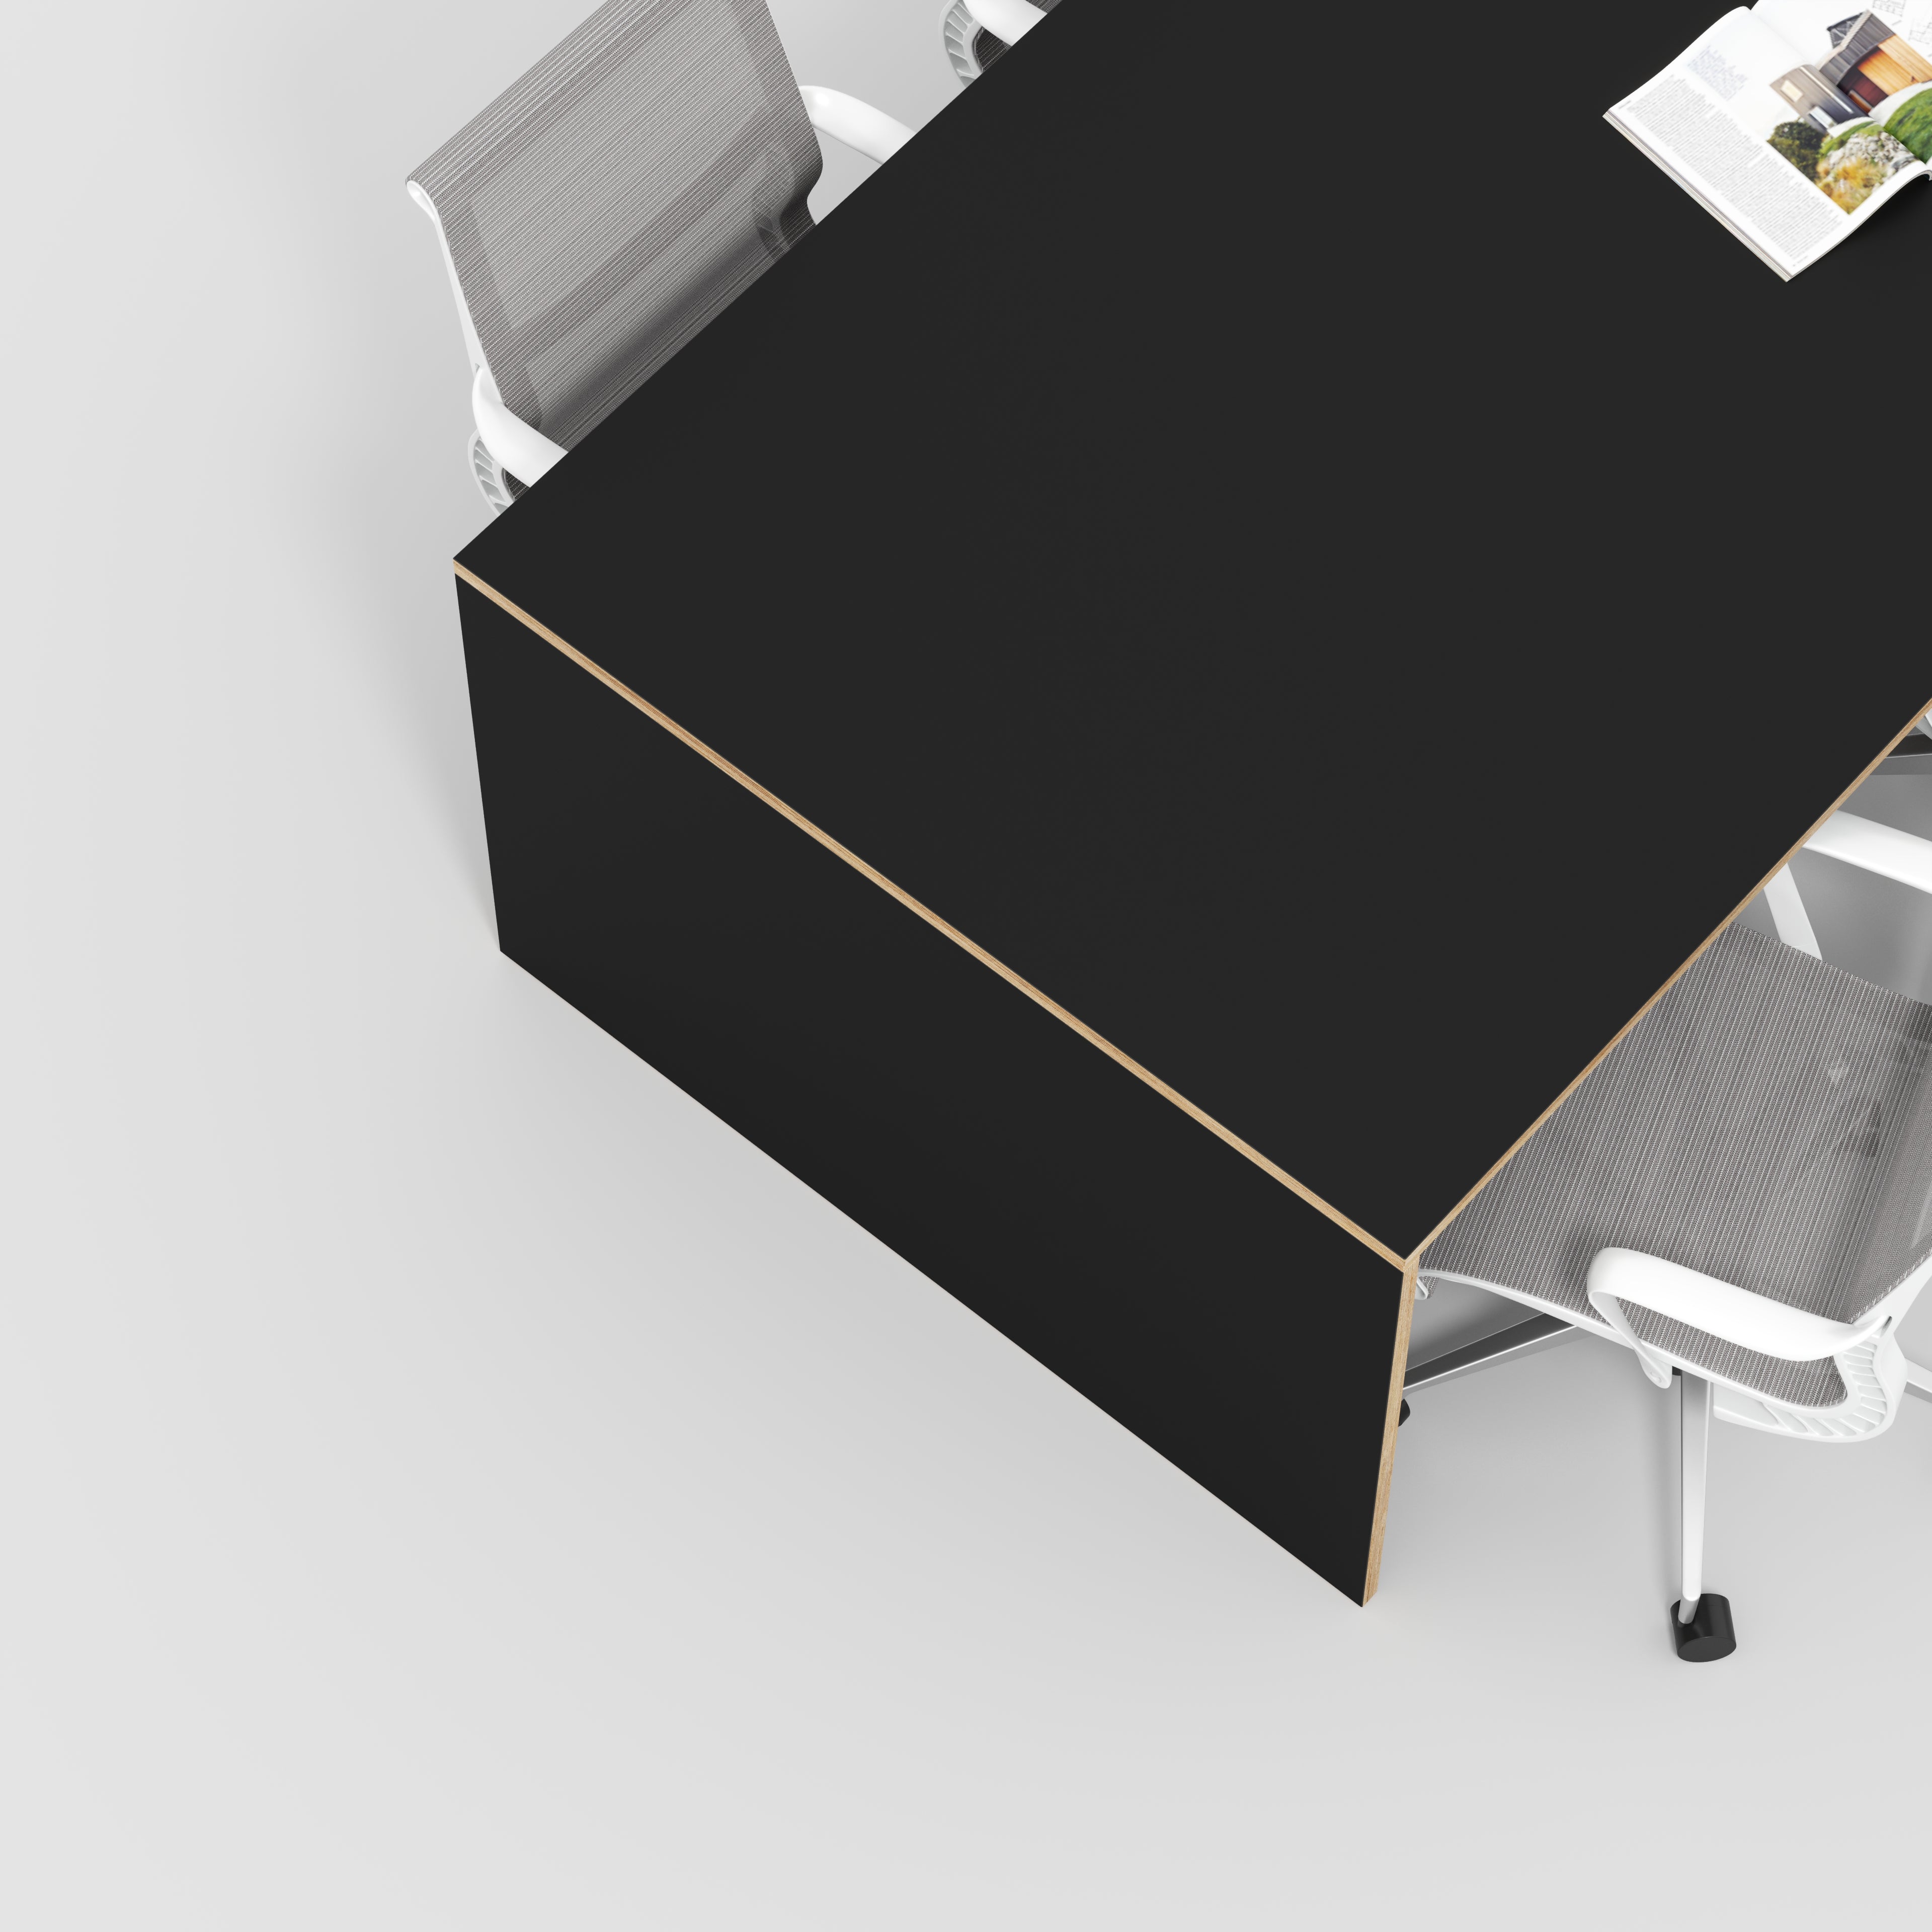 Table with Solid Sides - Formica Diamond Black - 4000(w) x 1000(d) x 750(h)